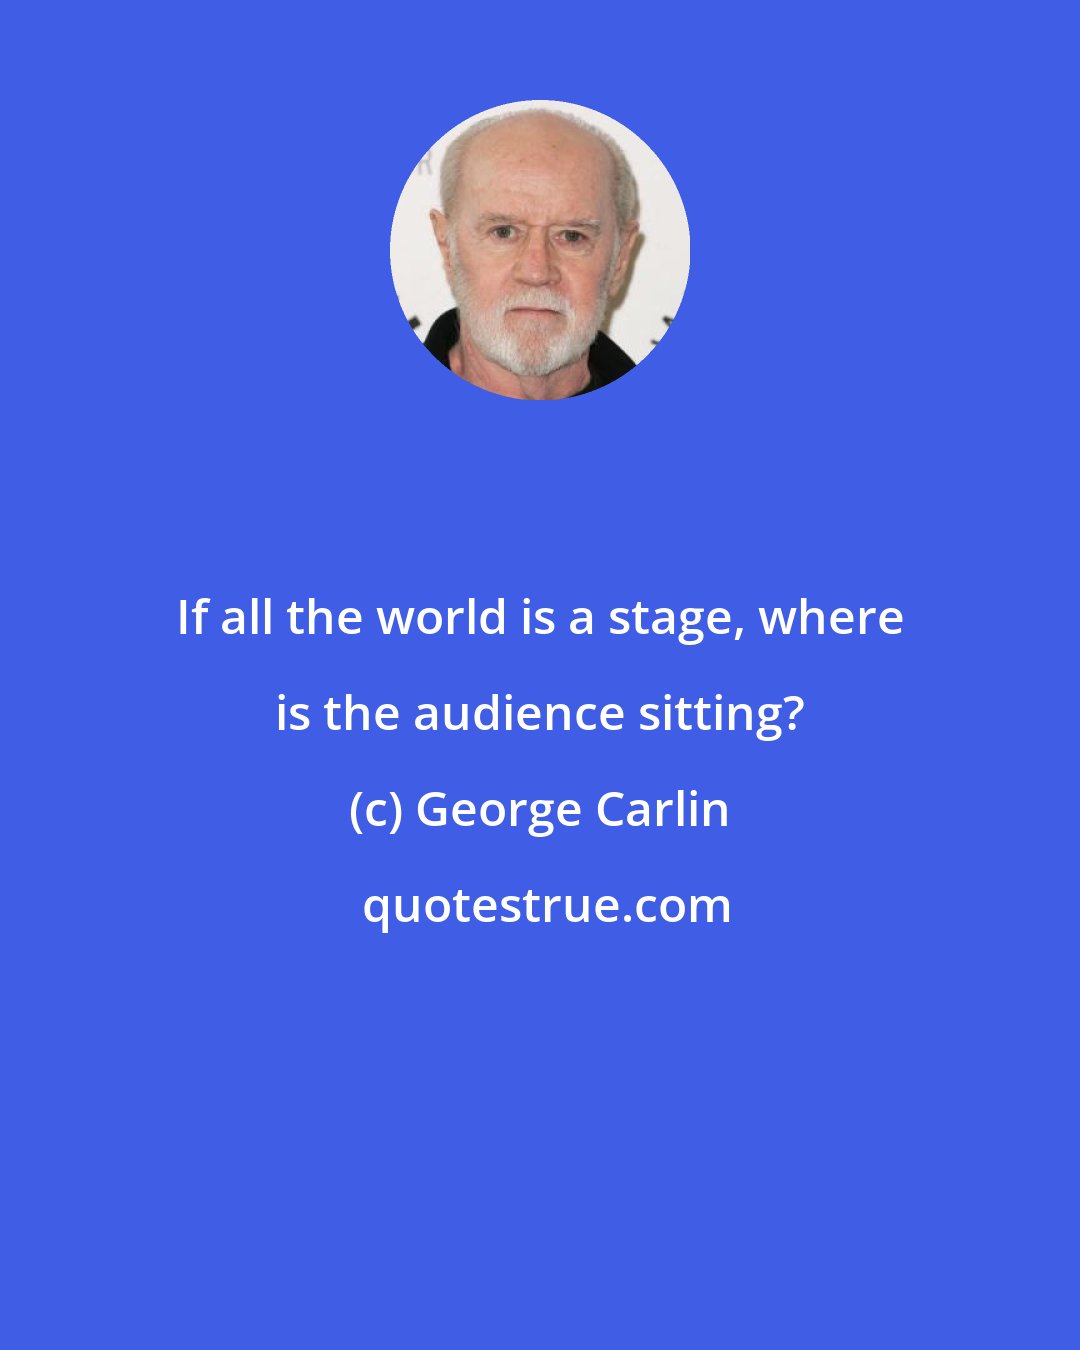 George Carlin: If all the world is a stage, where is the audience sitting?